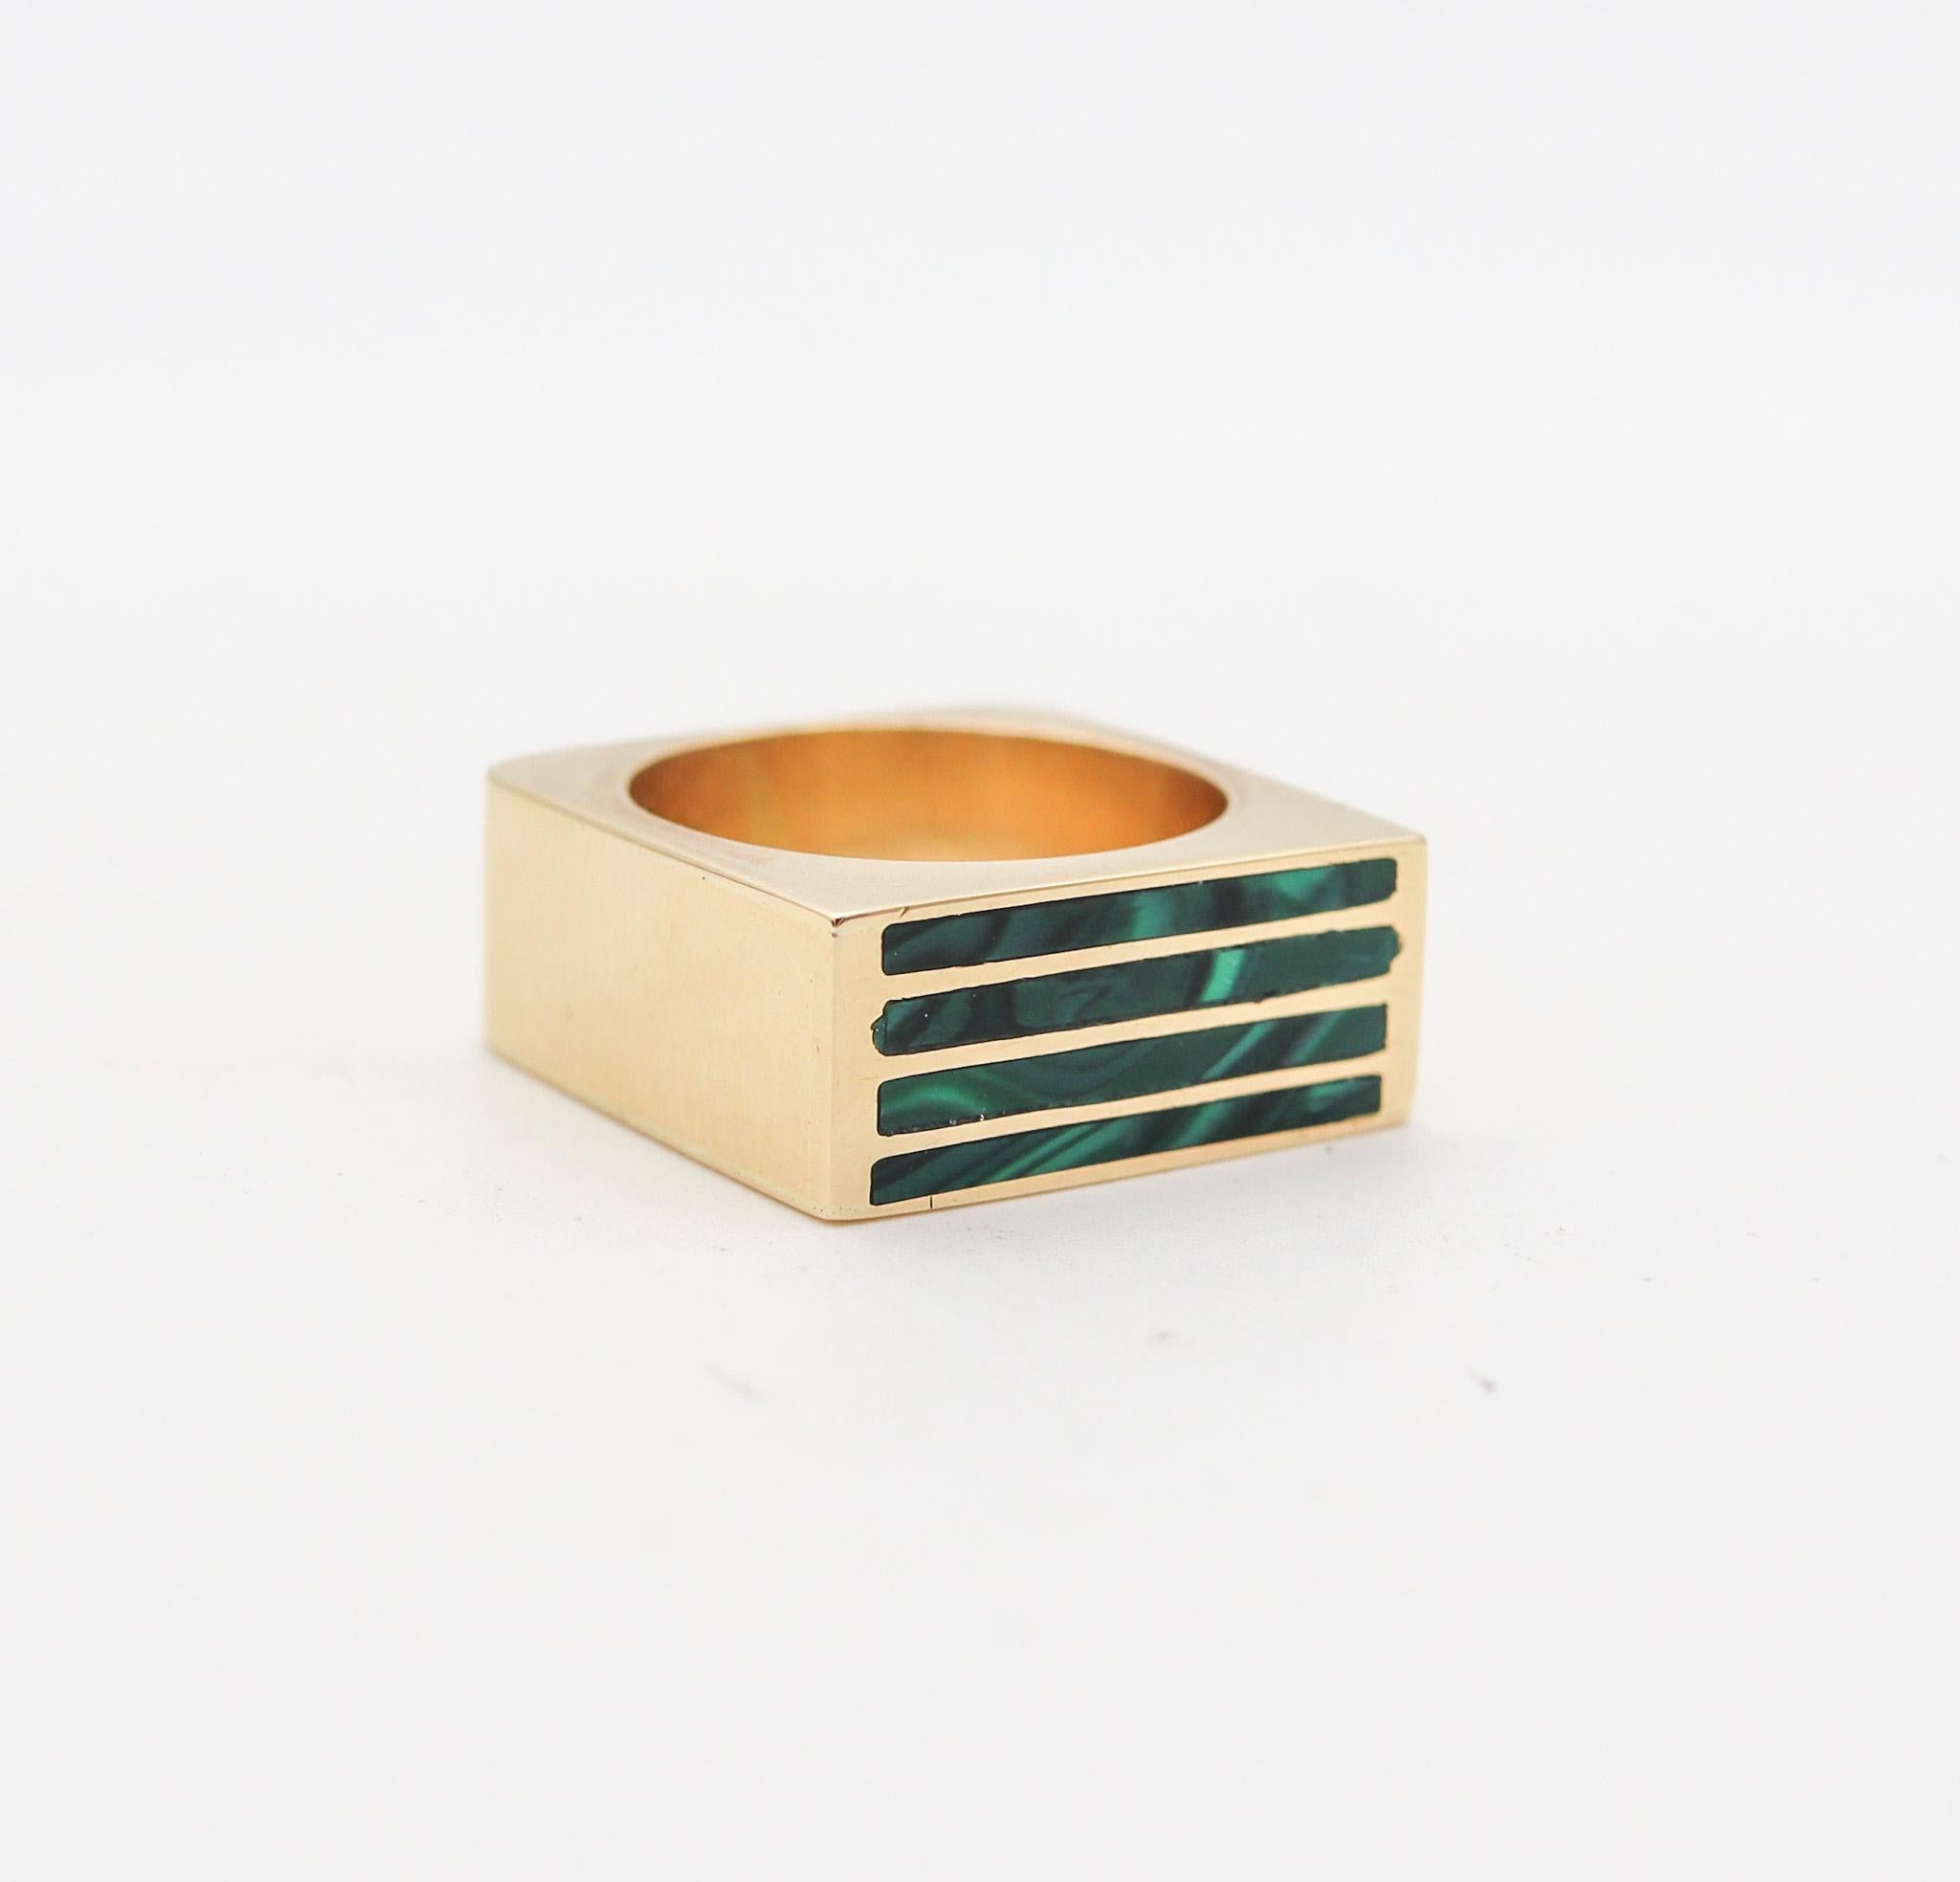 Cabochon Geometric 1970 Modernist Square Ring In 18Kt Yellow Gold With Inlaid Malachite For Sale